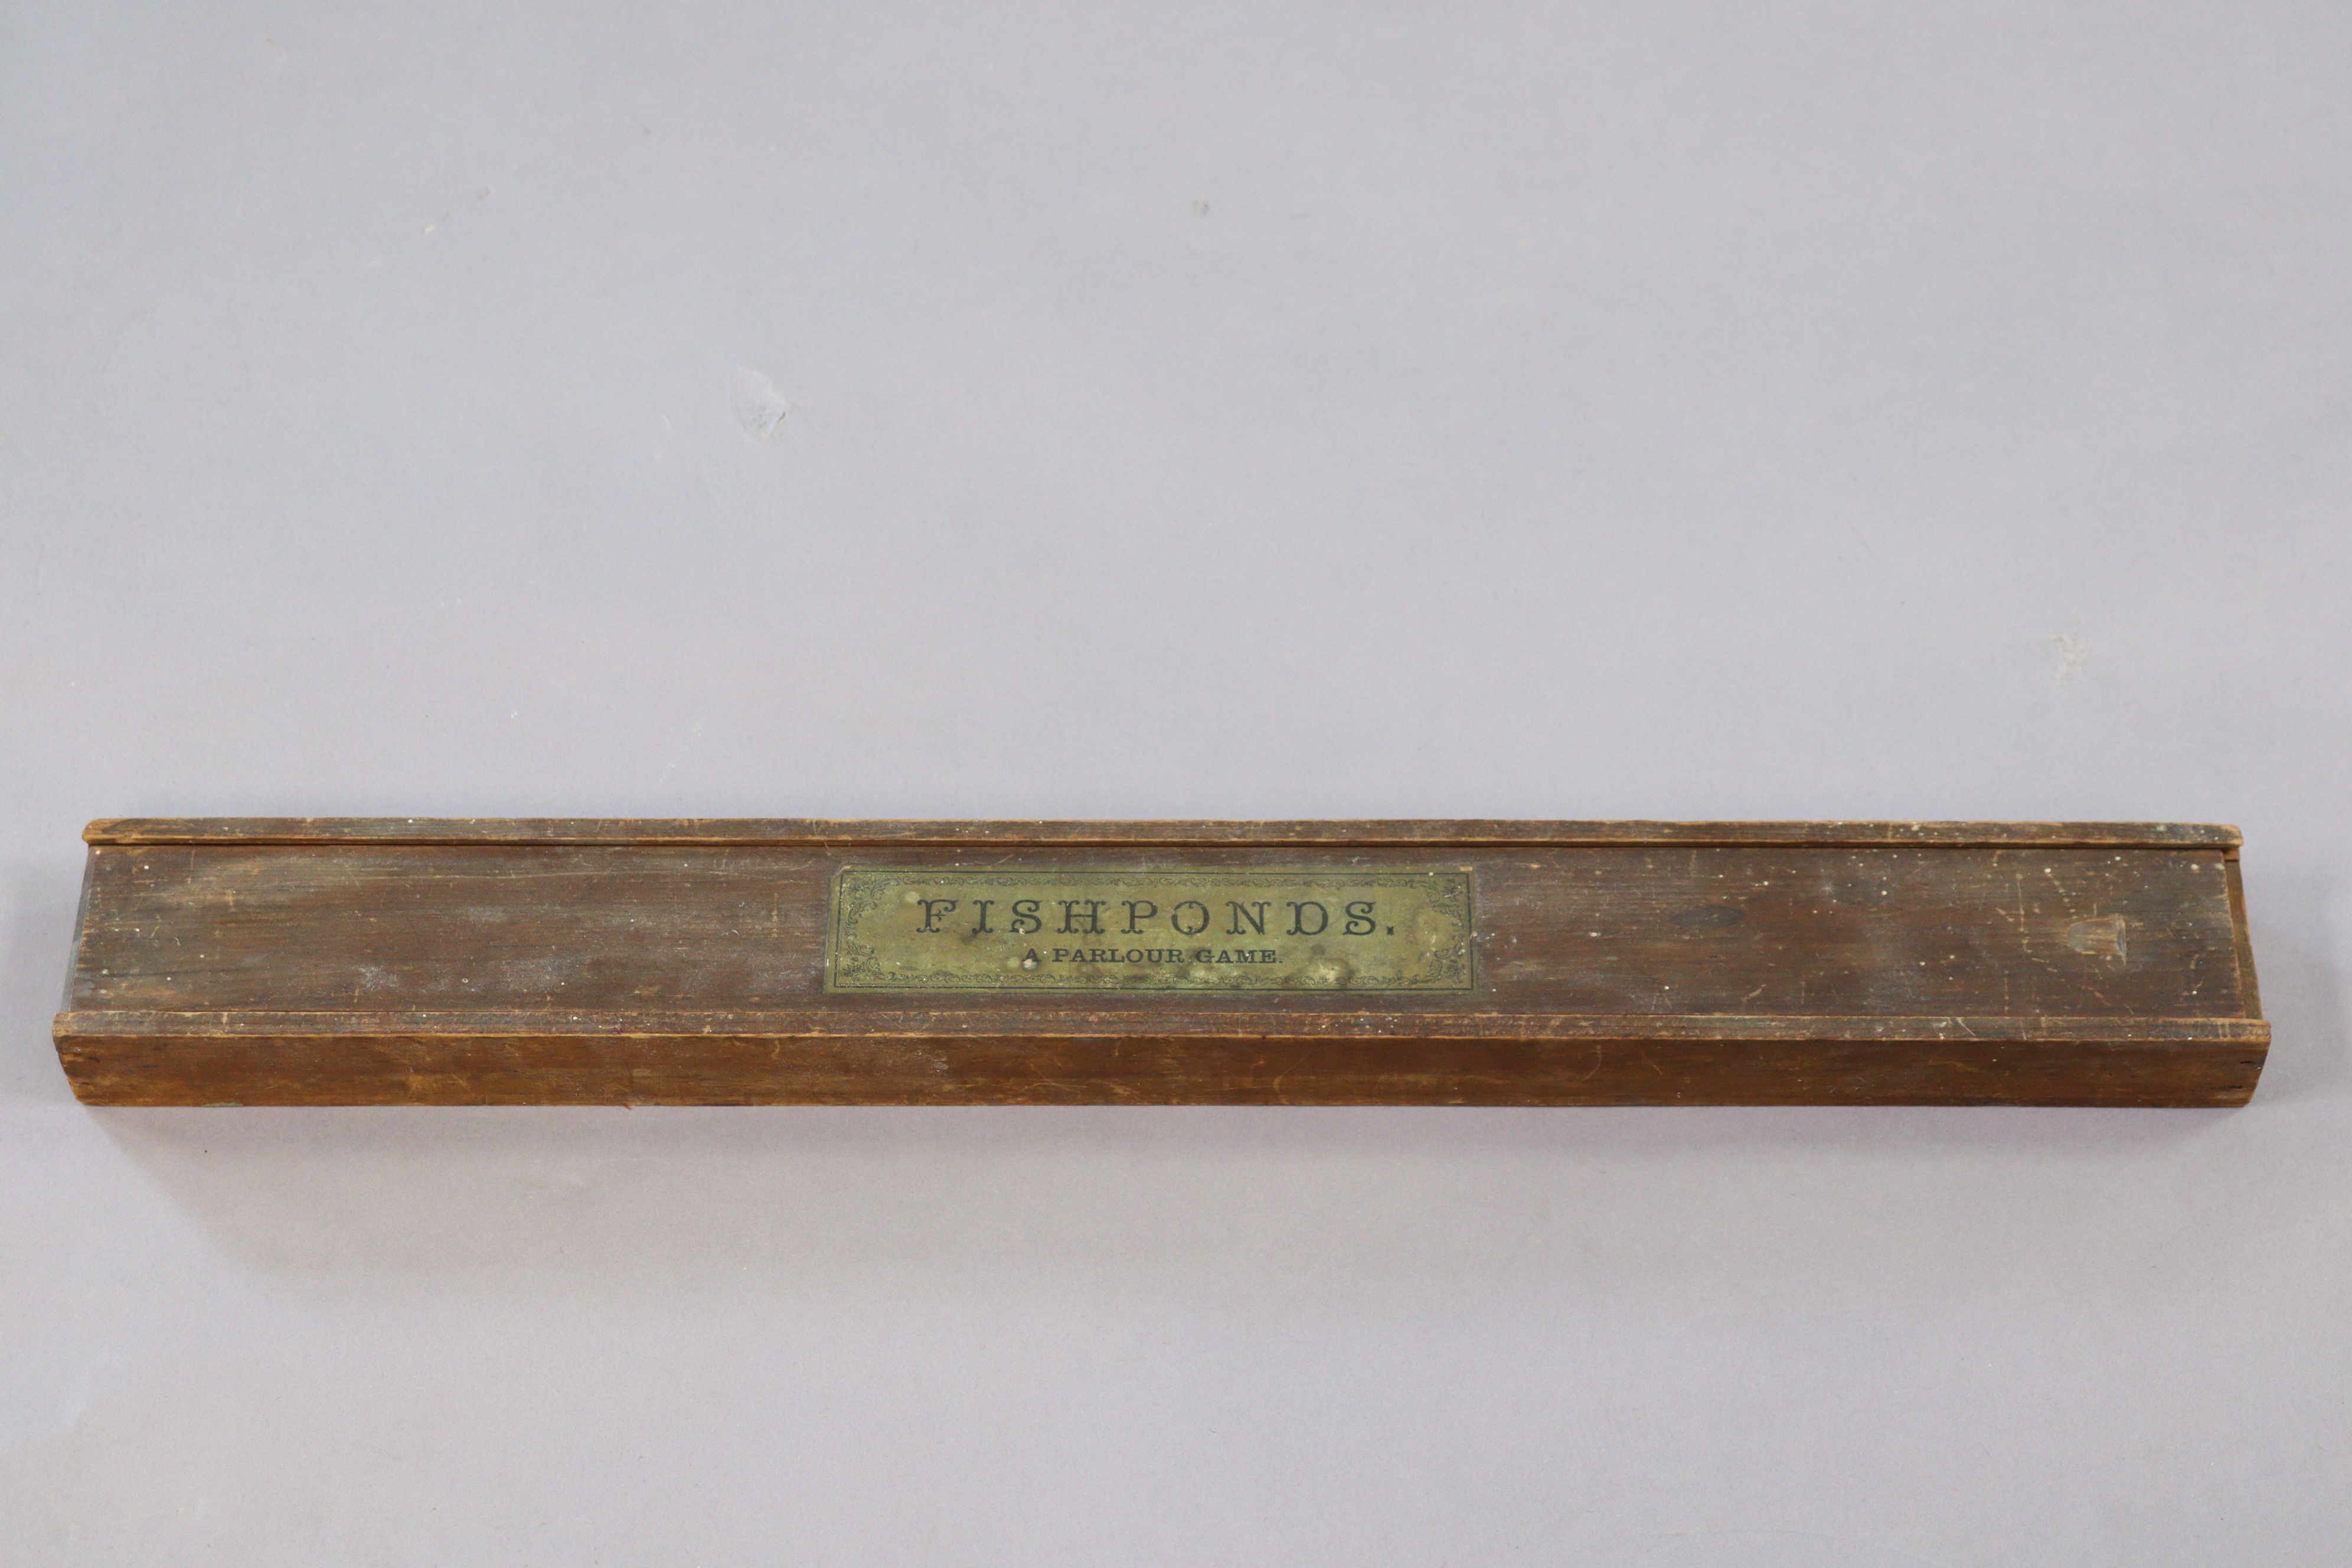 A Victorian “Fishponds” fishing parlour game, cased. - Image 3 of 3